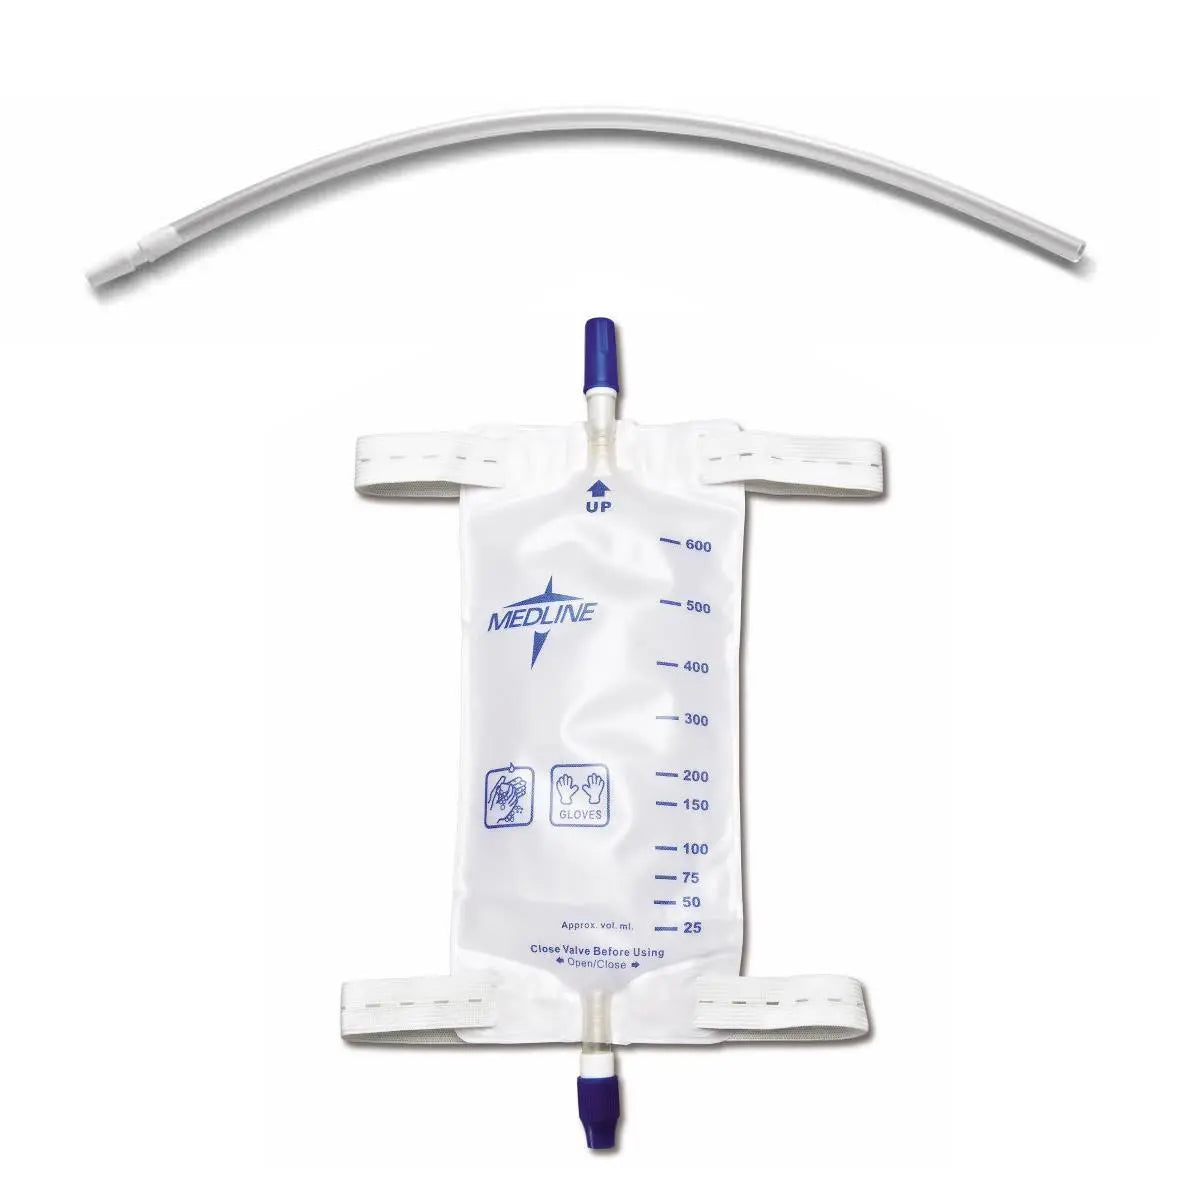 4-LITRE CLOSED SYSTEM STERILE URINE BAG CHECK VALVE NEEDLESS SAMPLING PORT  DRIP CHAMBER DRAIN STOPCOCK INTEGRATED HOOK BOX OF 20 - infineed